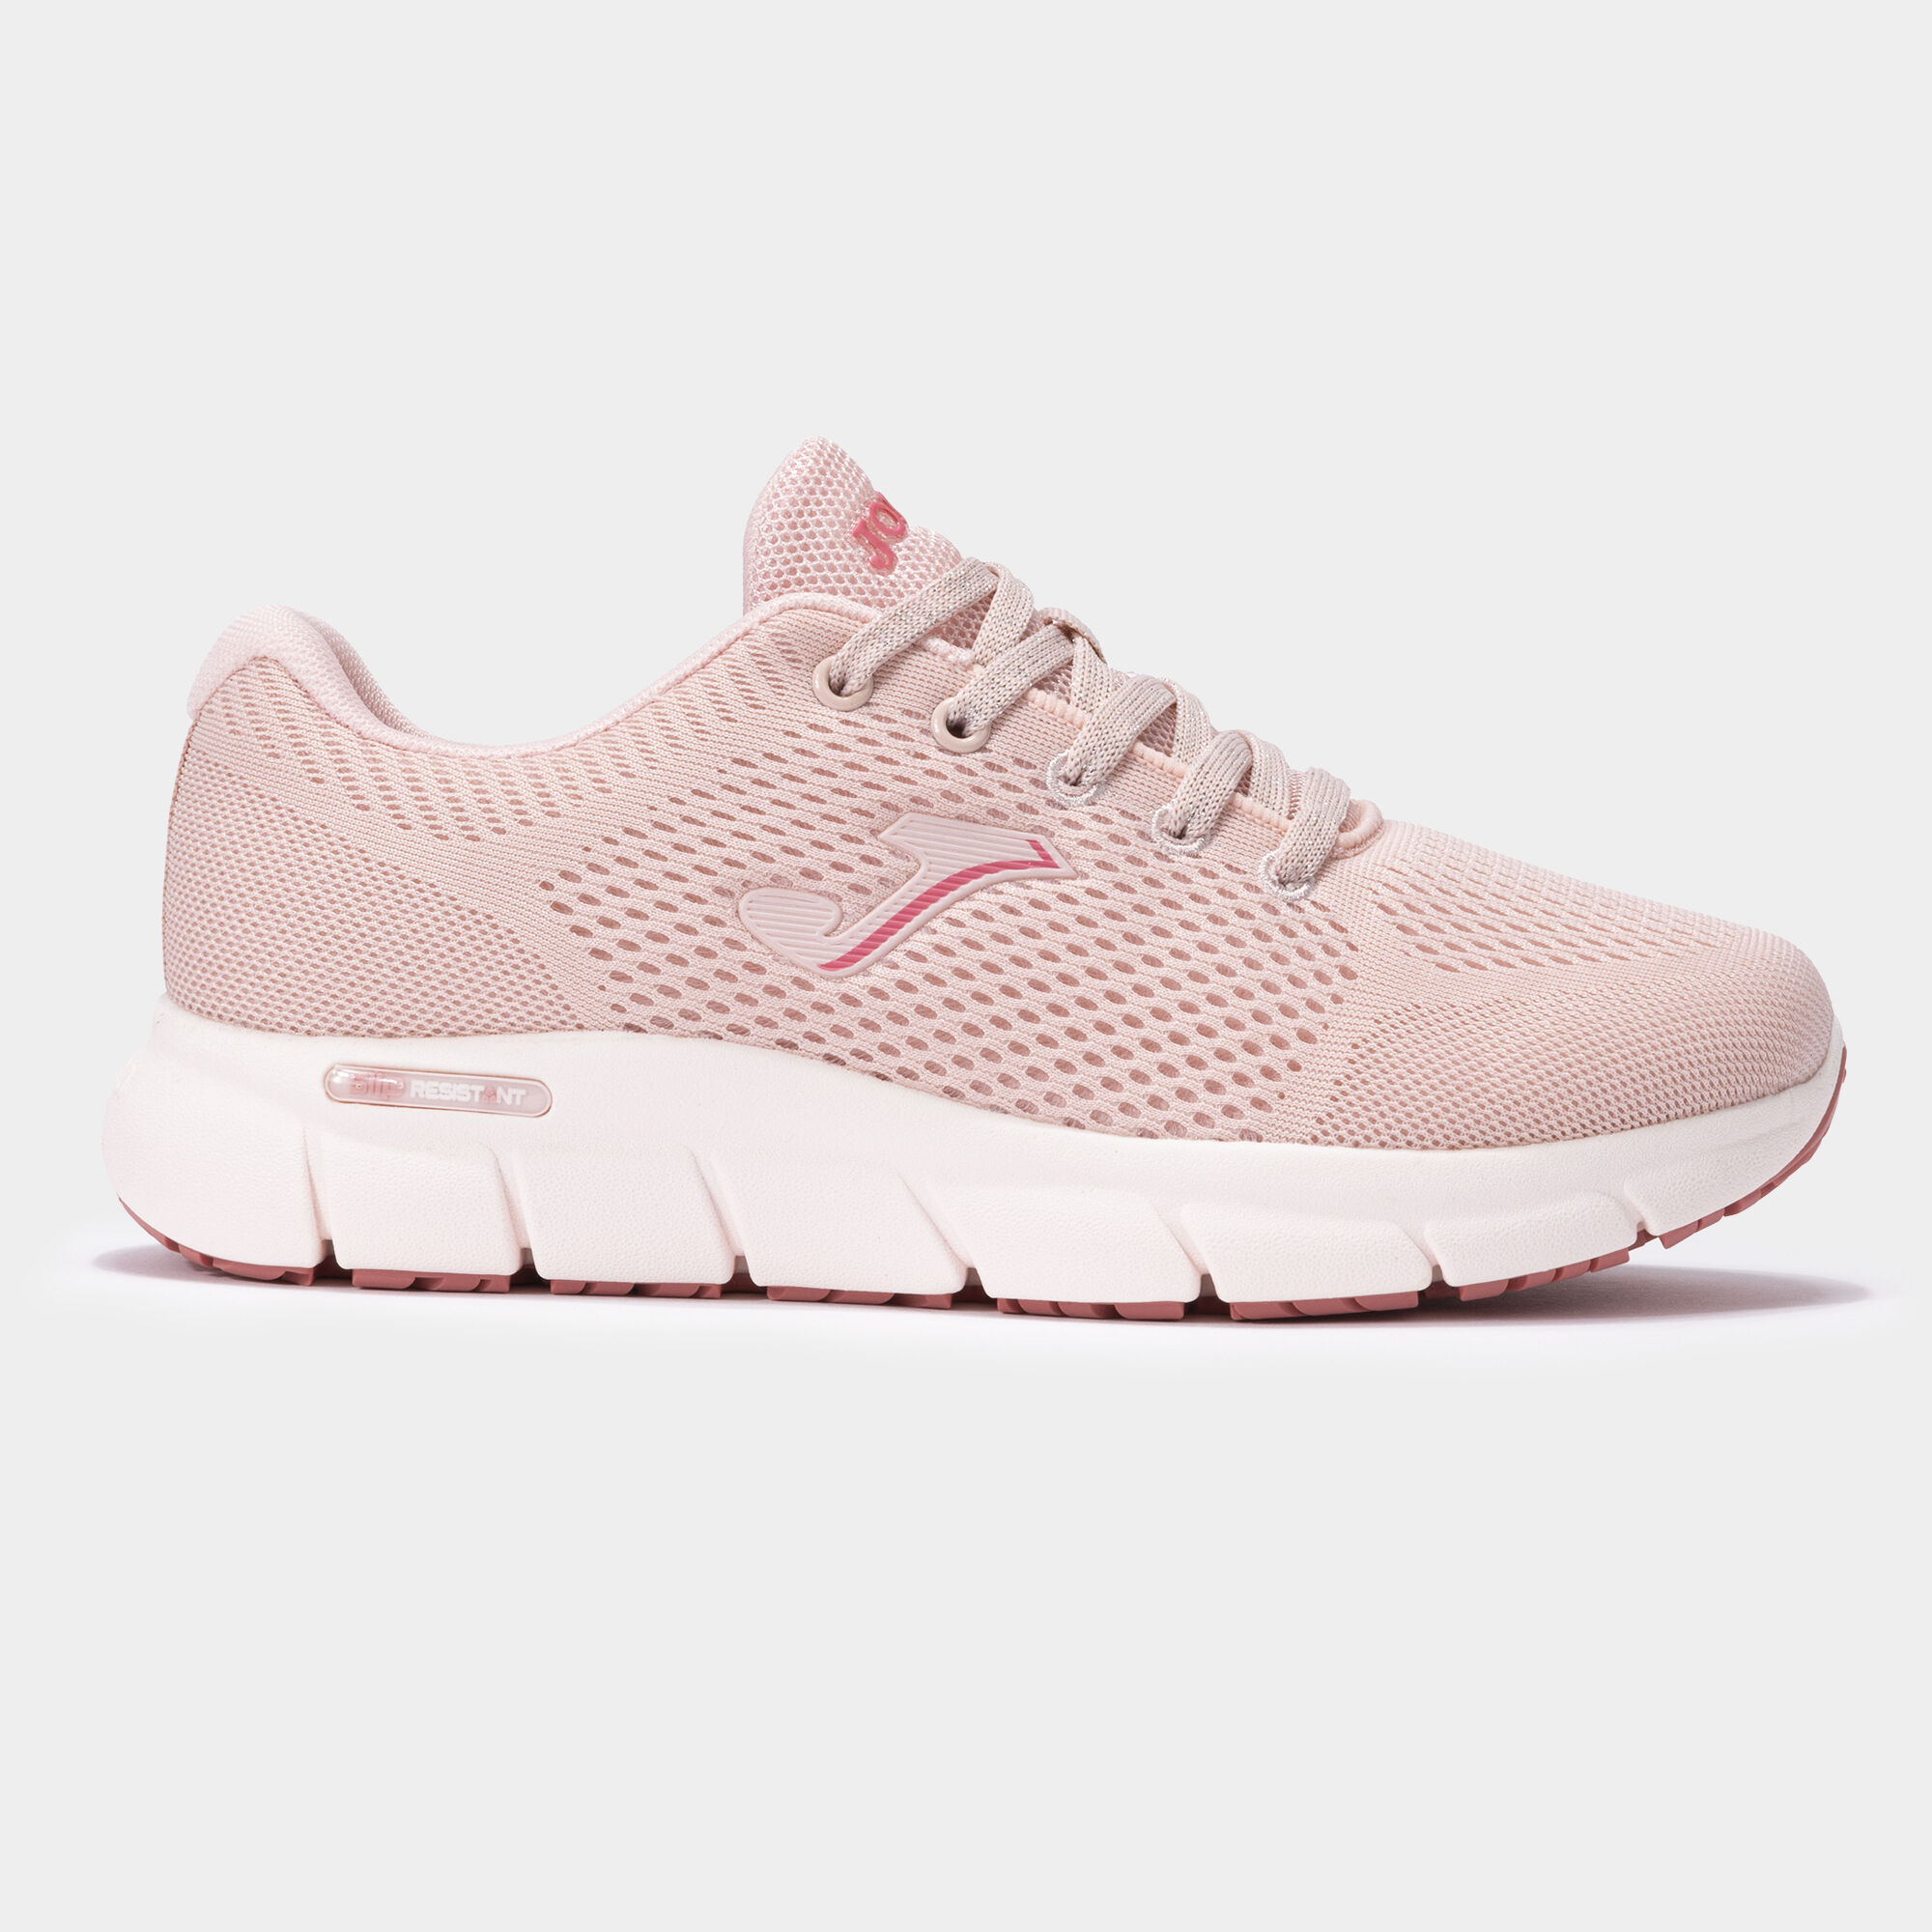 Chaussures casual Zen Lady 24 femme rose clair